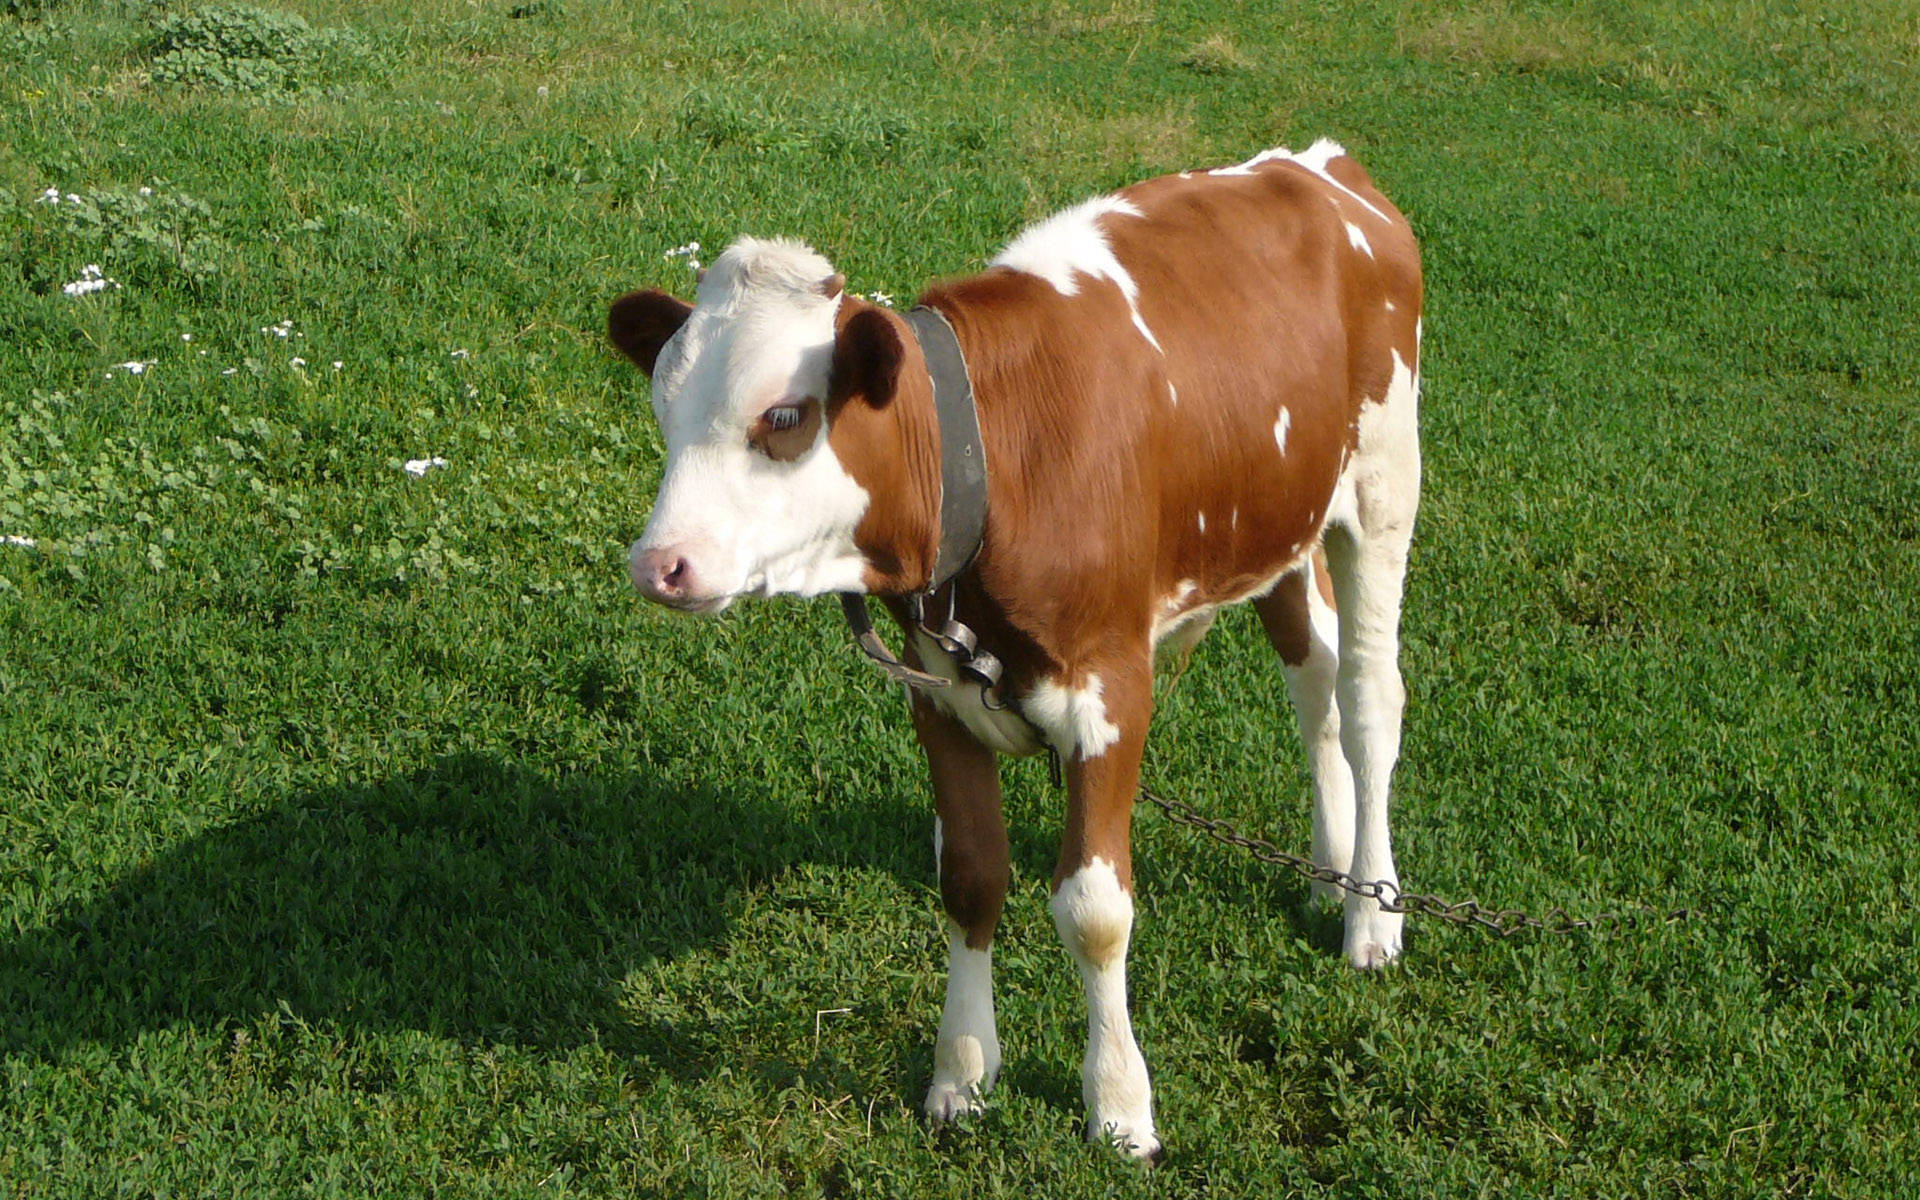 Cute Cow With Black Collar On Grass